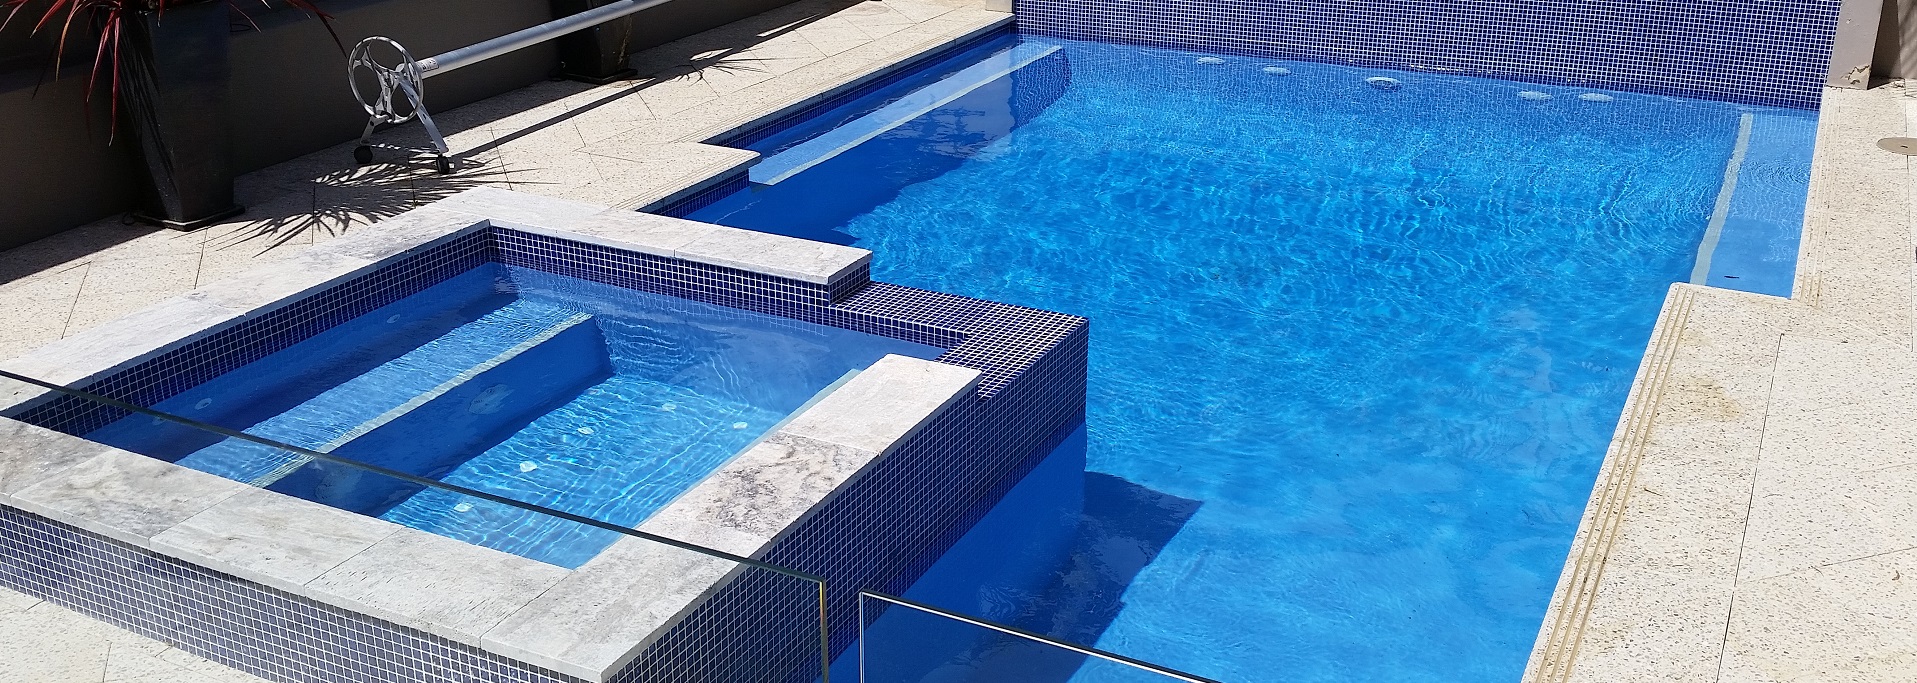 Pool Renovations: add a spa to your existing pool